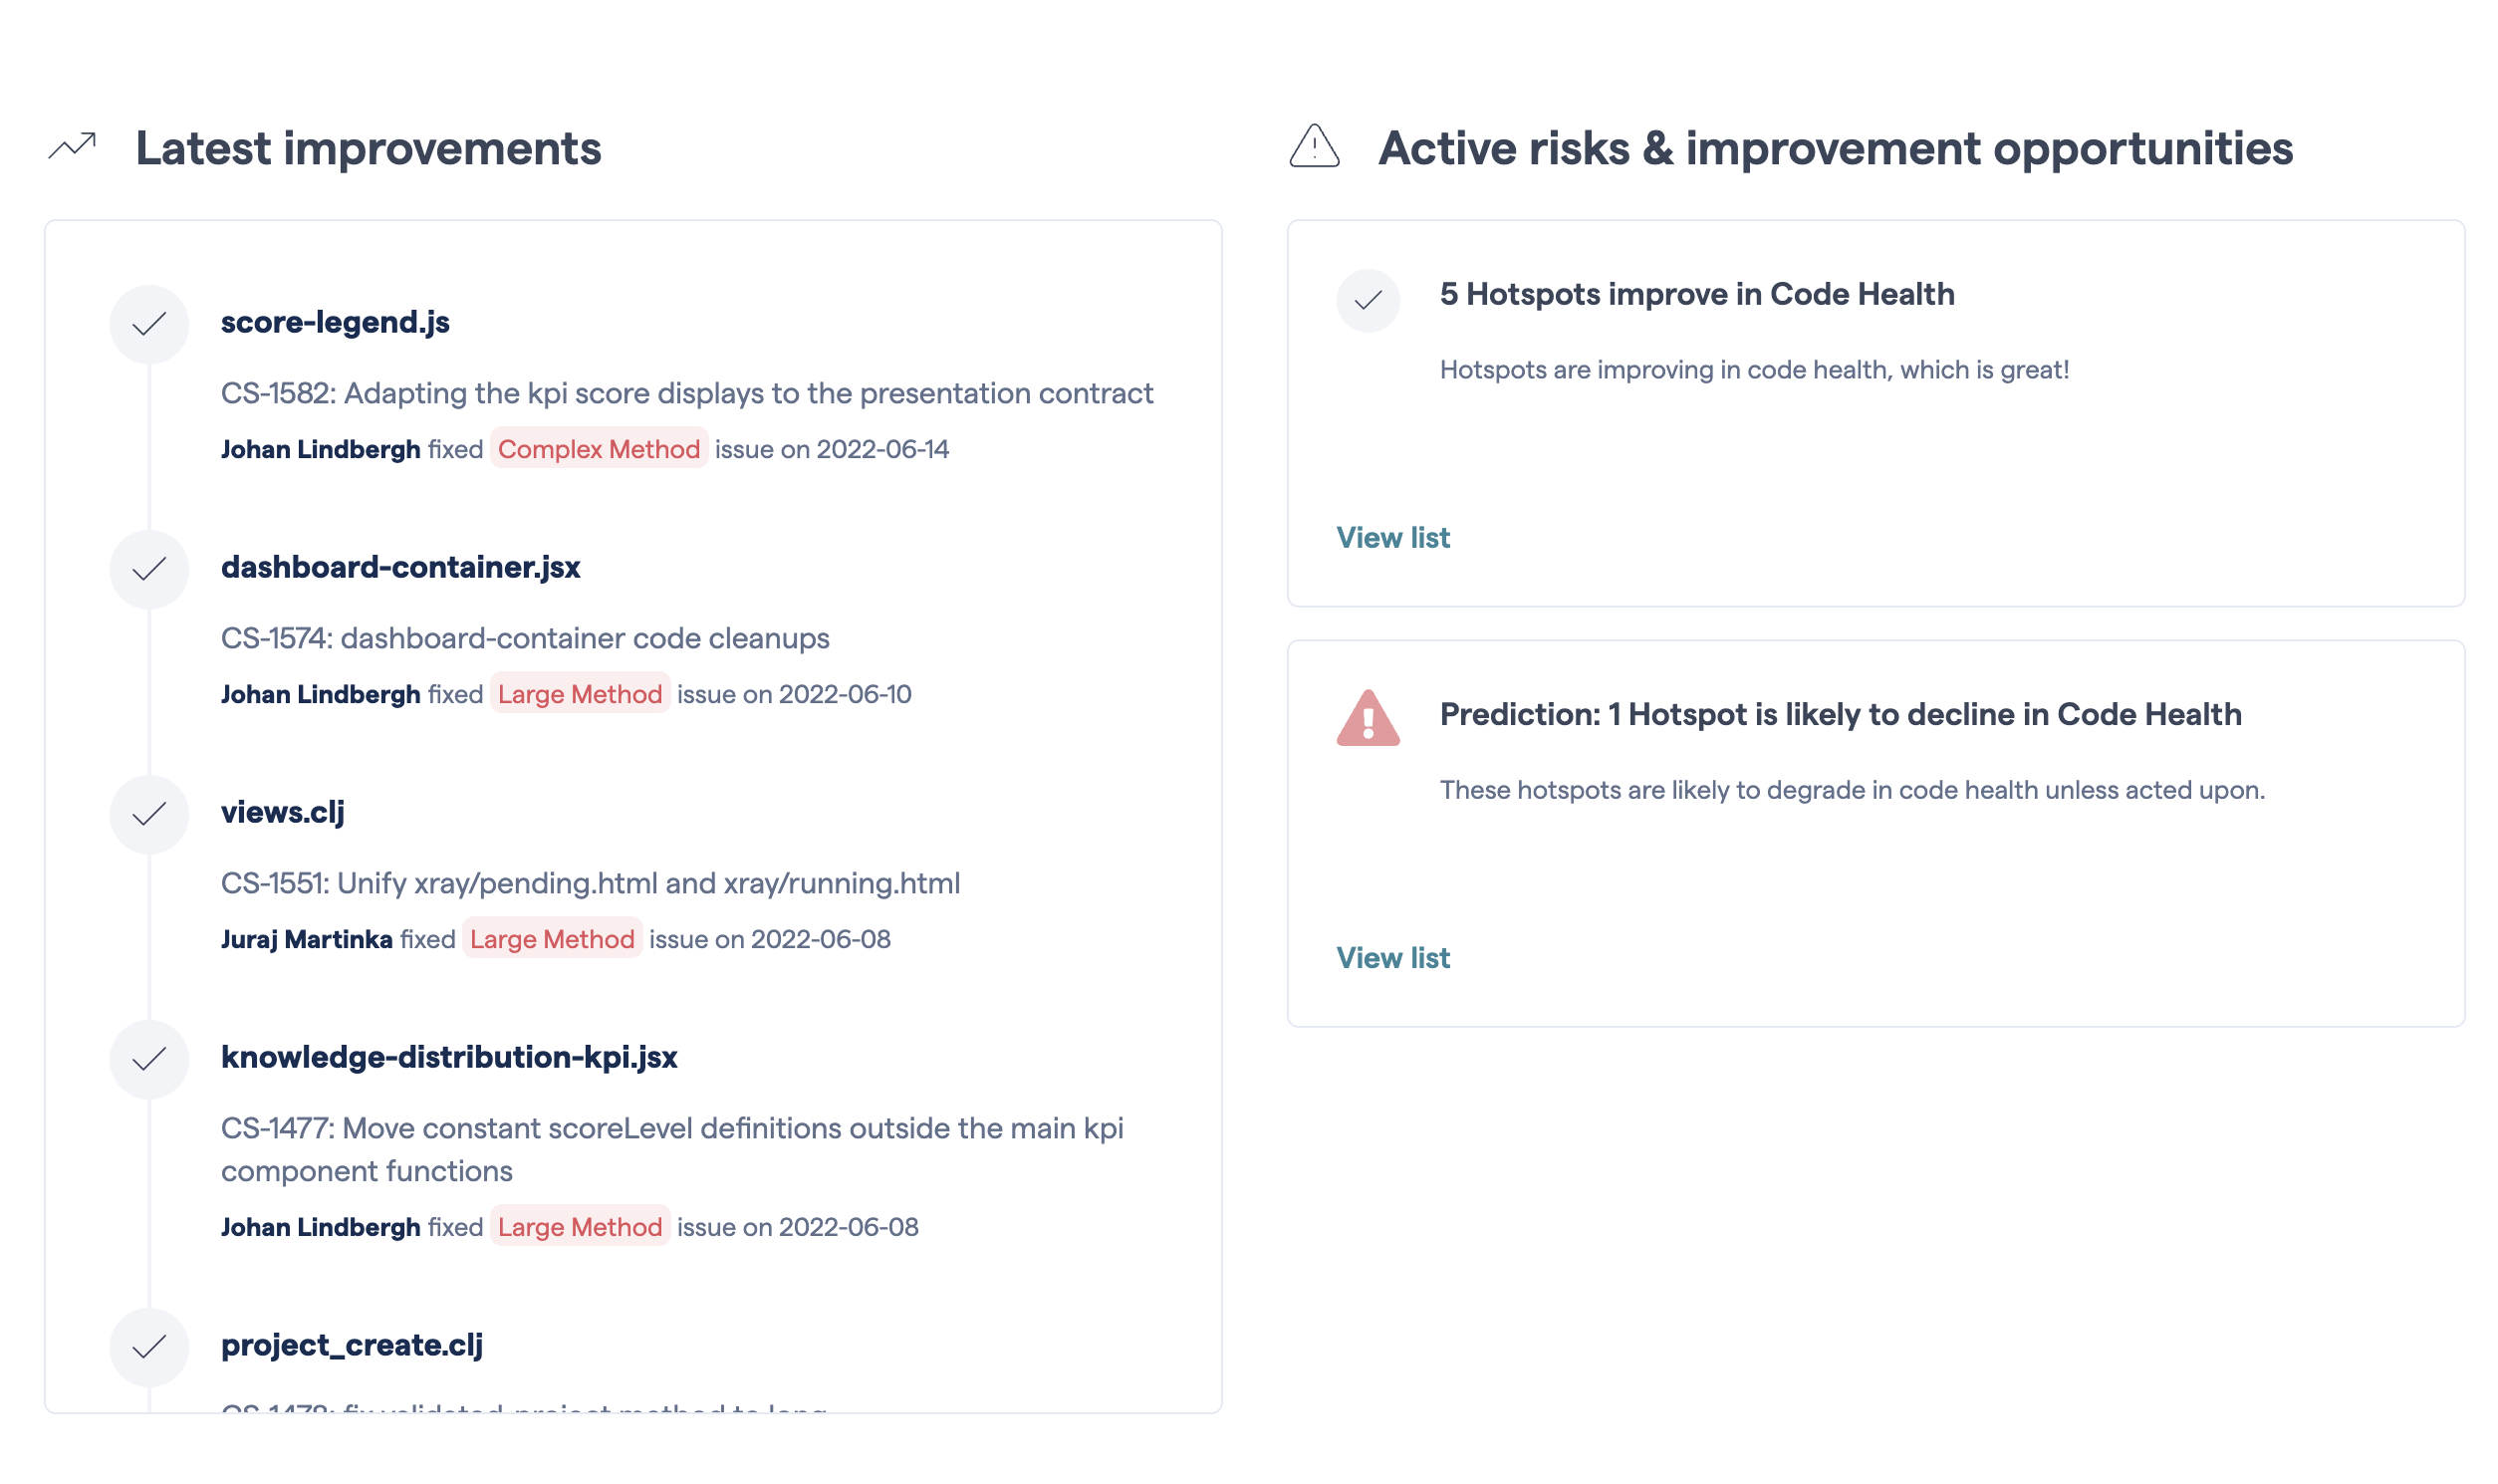 Notifications on risks together with highlights of successful improvements.